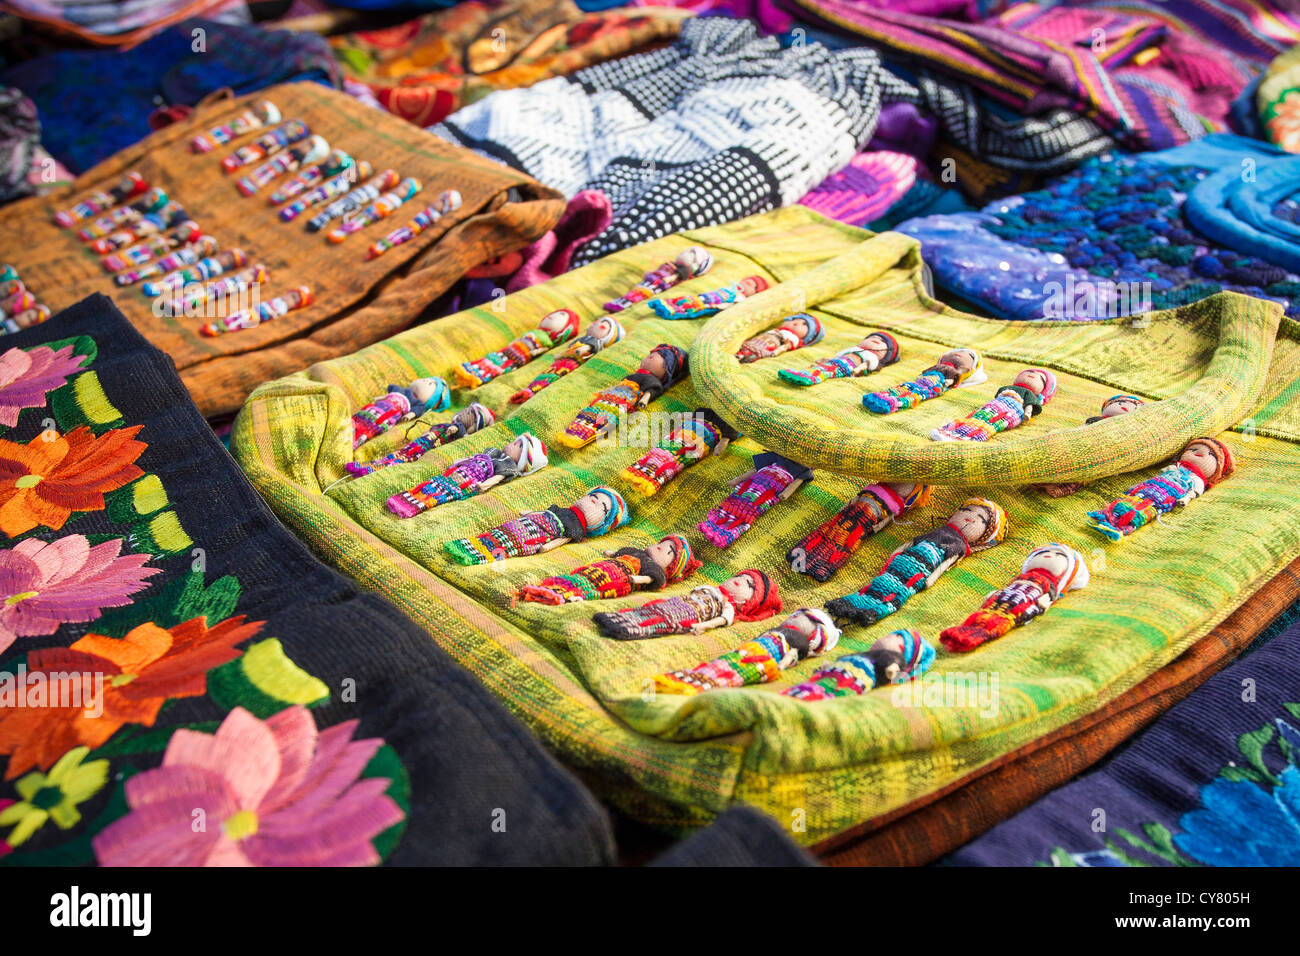 Stitched dolls decorate purses at the Tlacolula, Oaxaca market in Mexico. Stock Photo